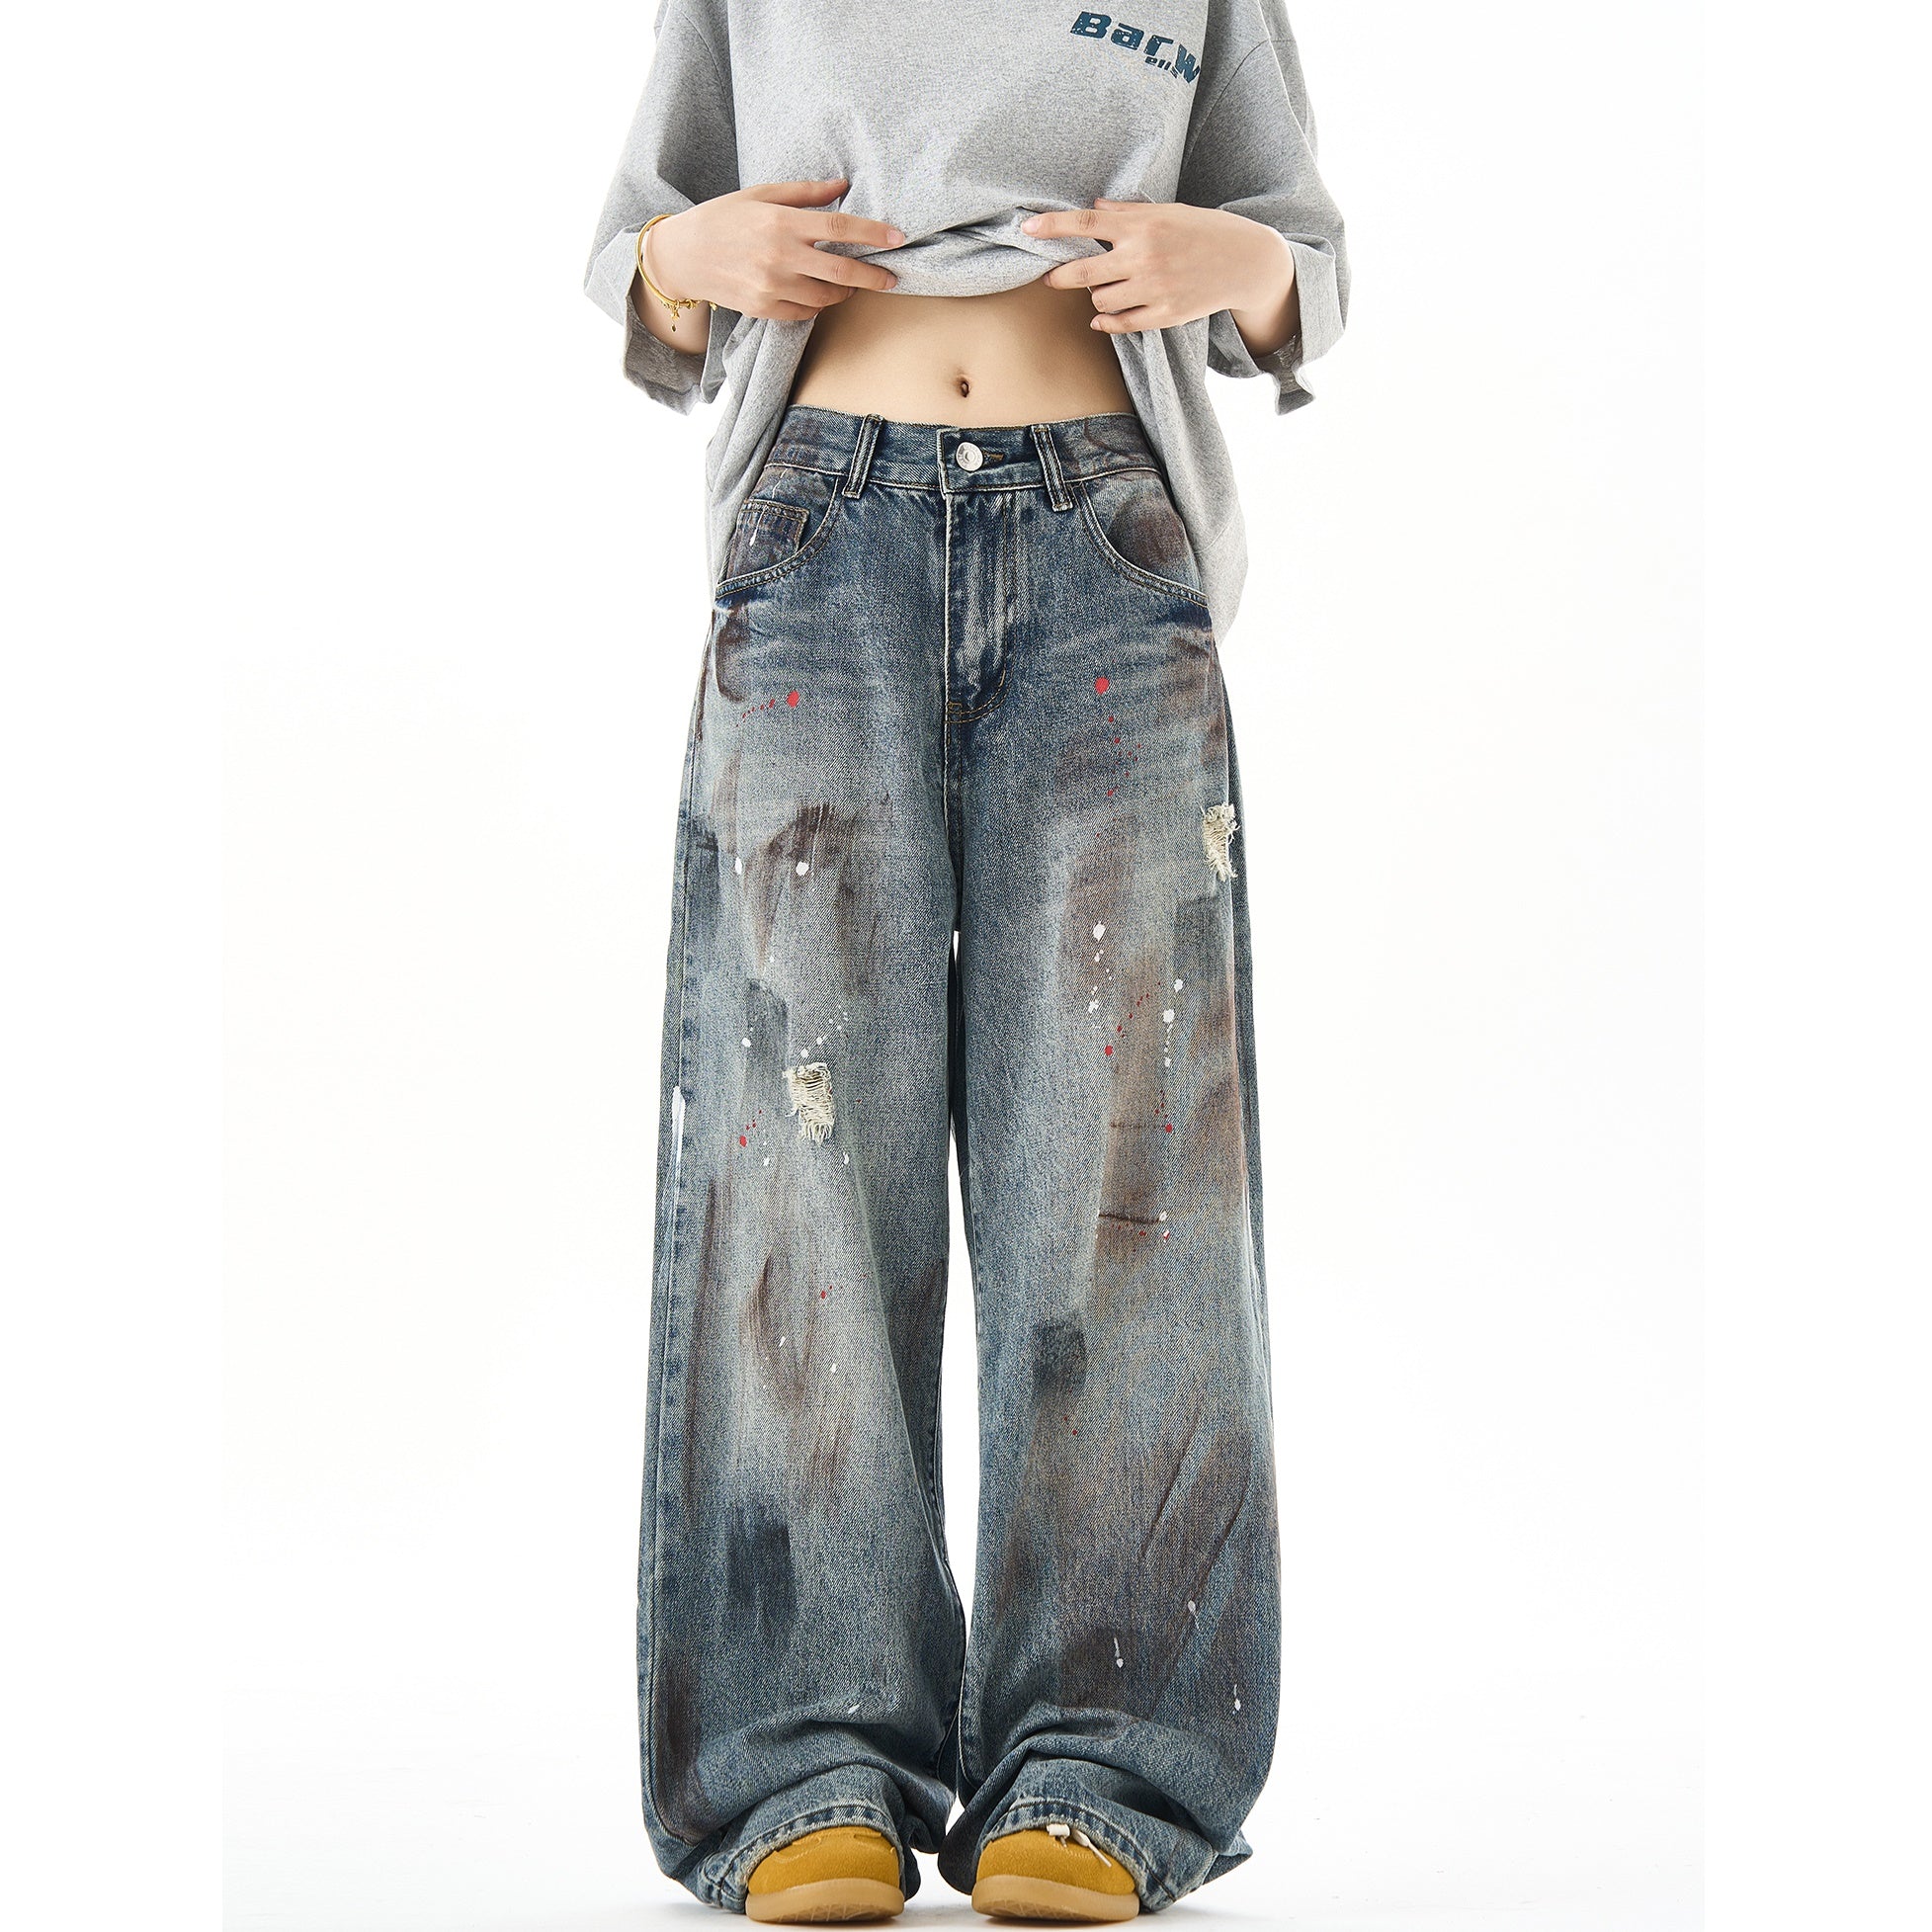 Dirty Dyed Distressed Ripped Jeans HG7033